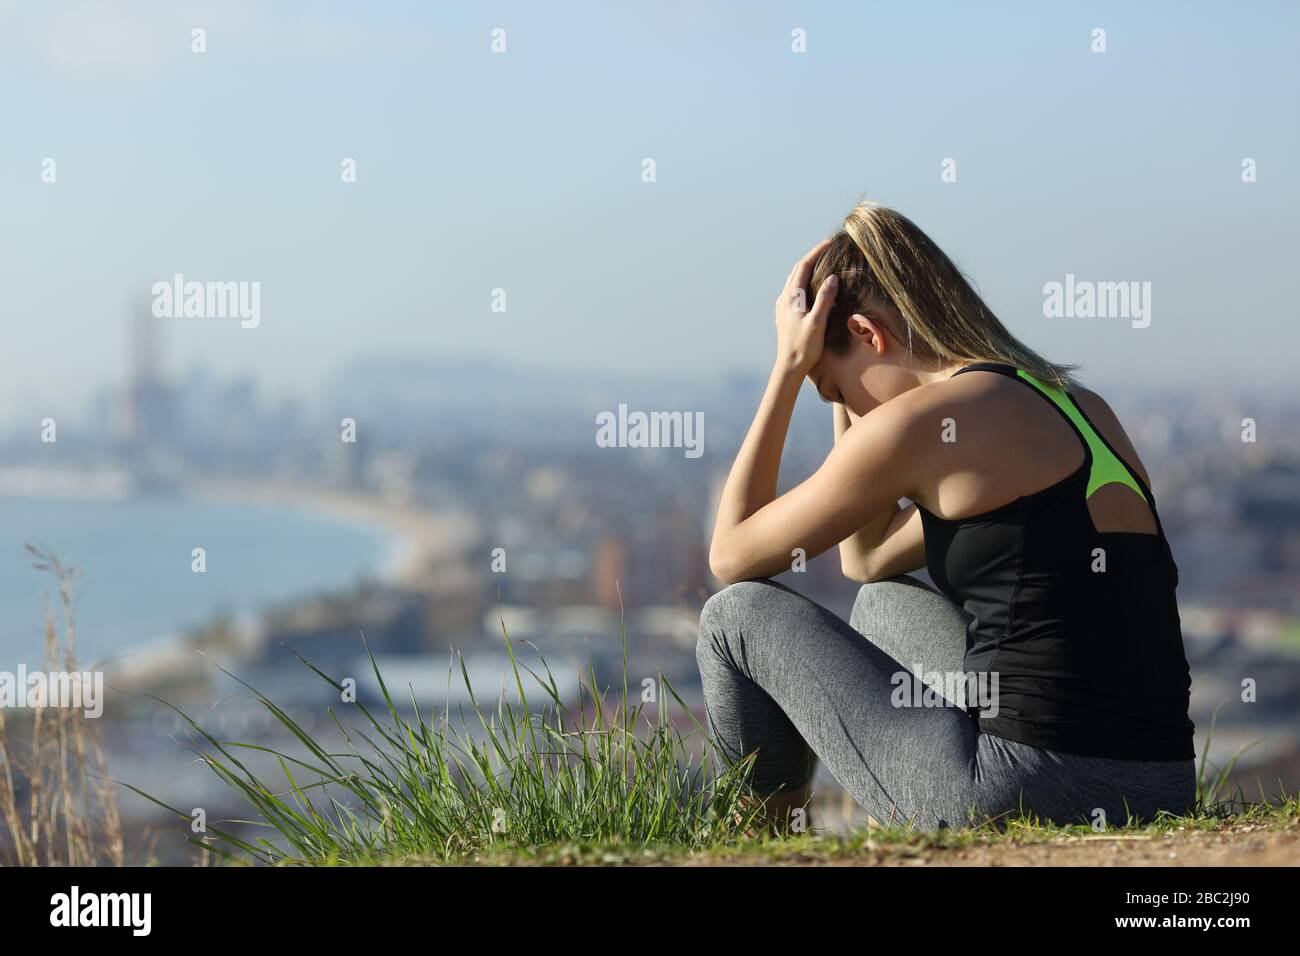 Frustrated runner sitting outdoors complaining in the city outskirts a sunny day Stock Photo